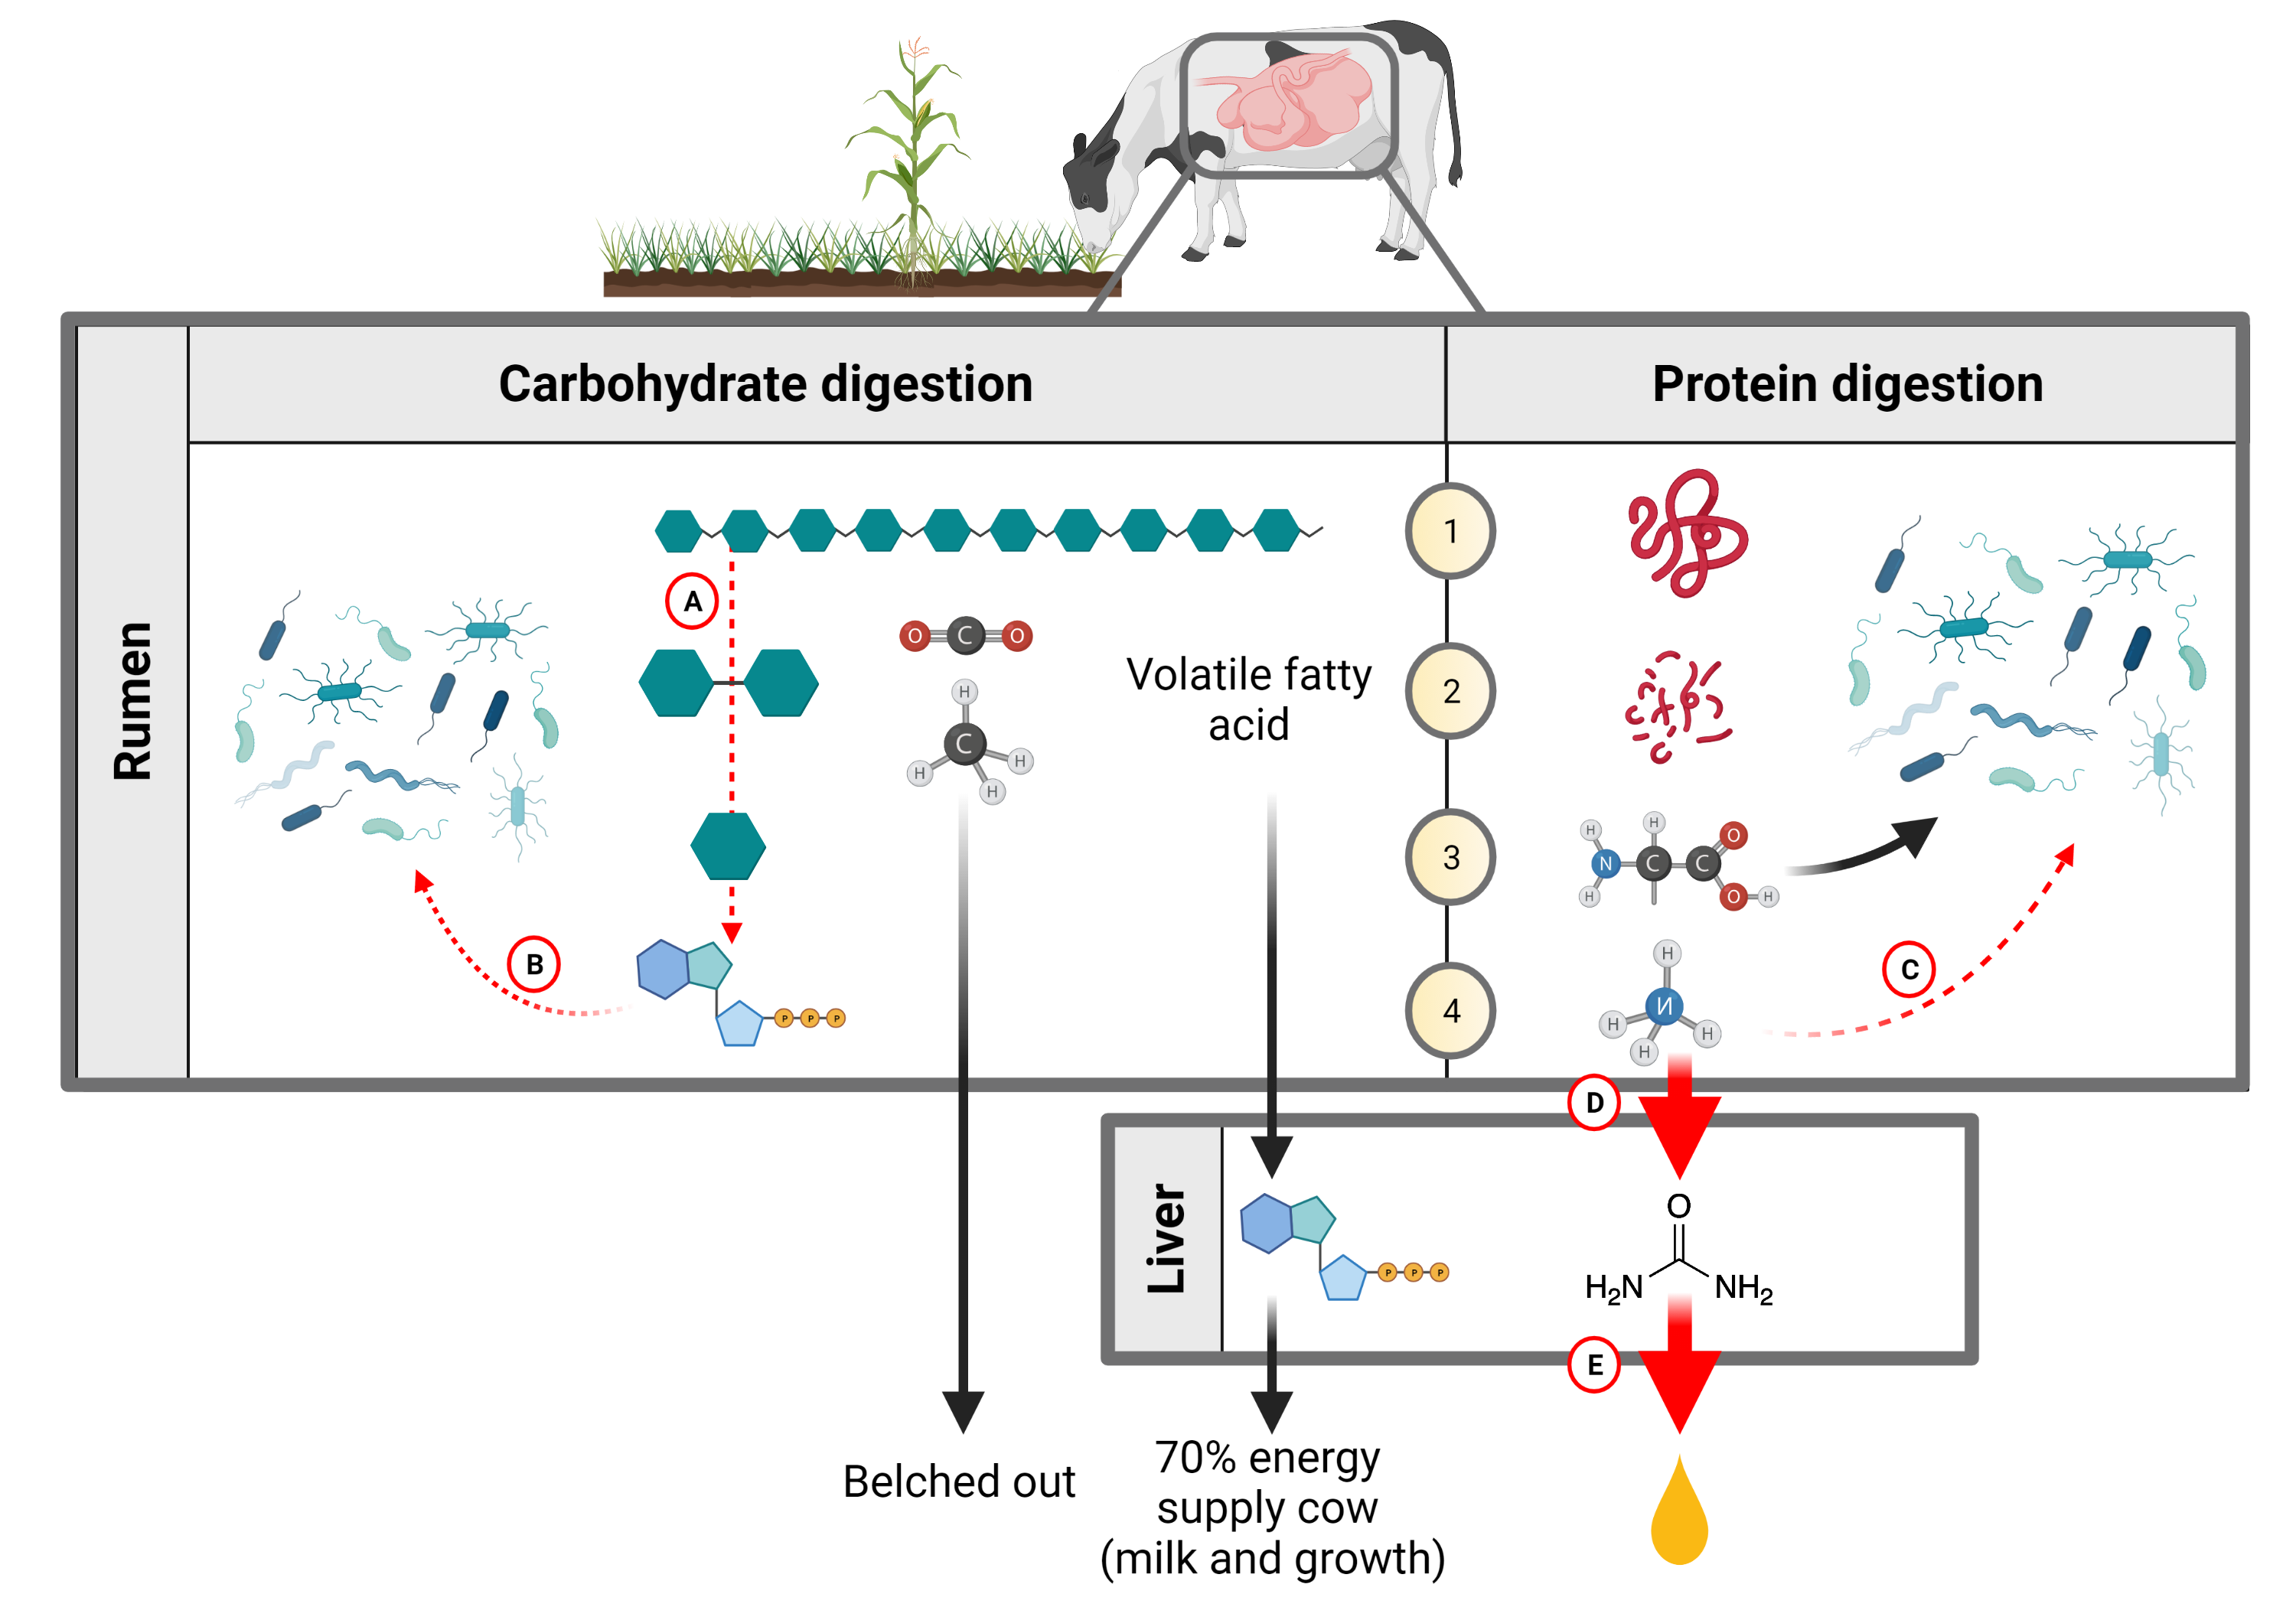 Carbohydrate and protein digestion by cattle, if carbohydrate fermentation is suboptimal compared to protein intake.